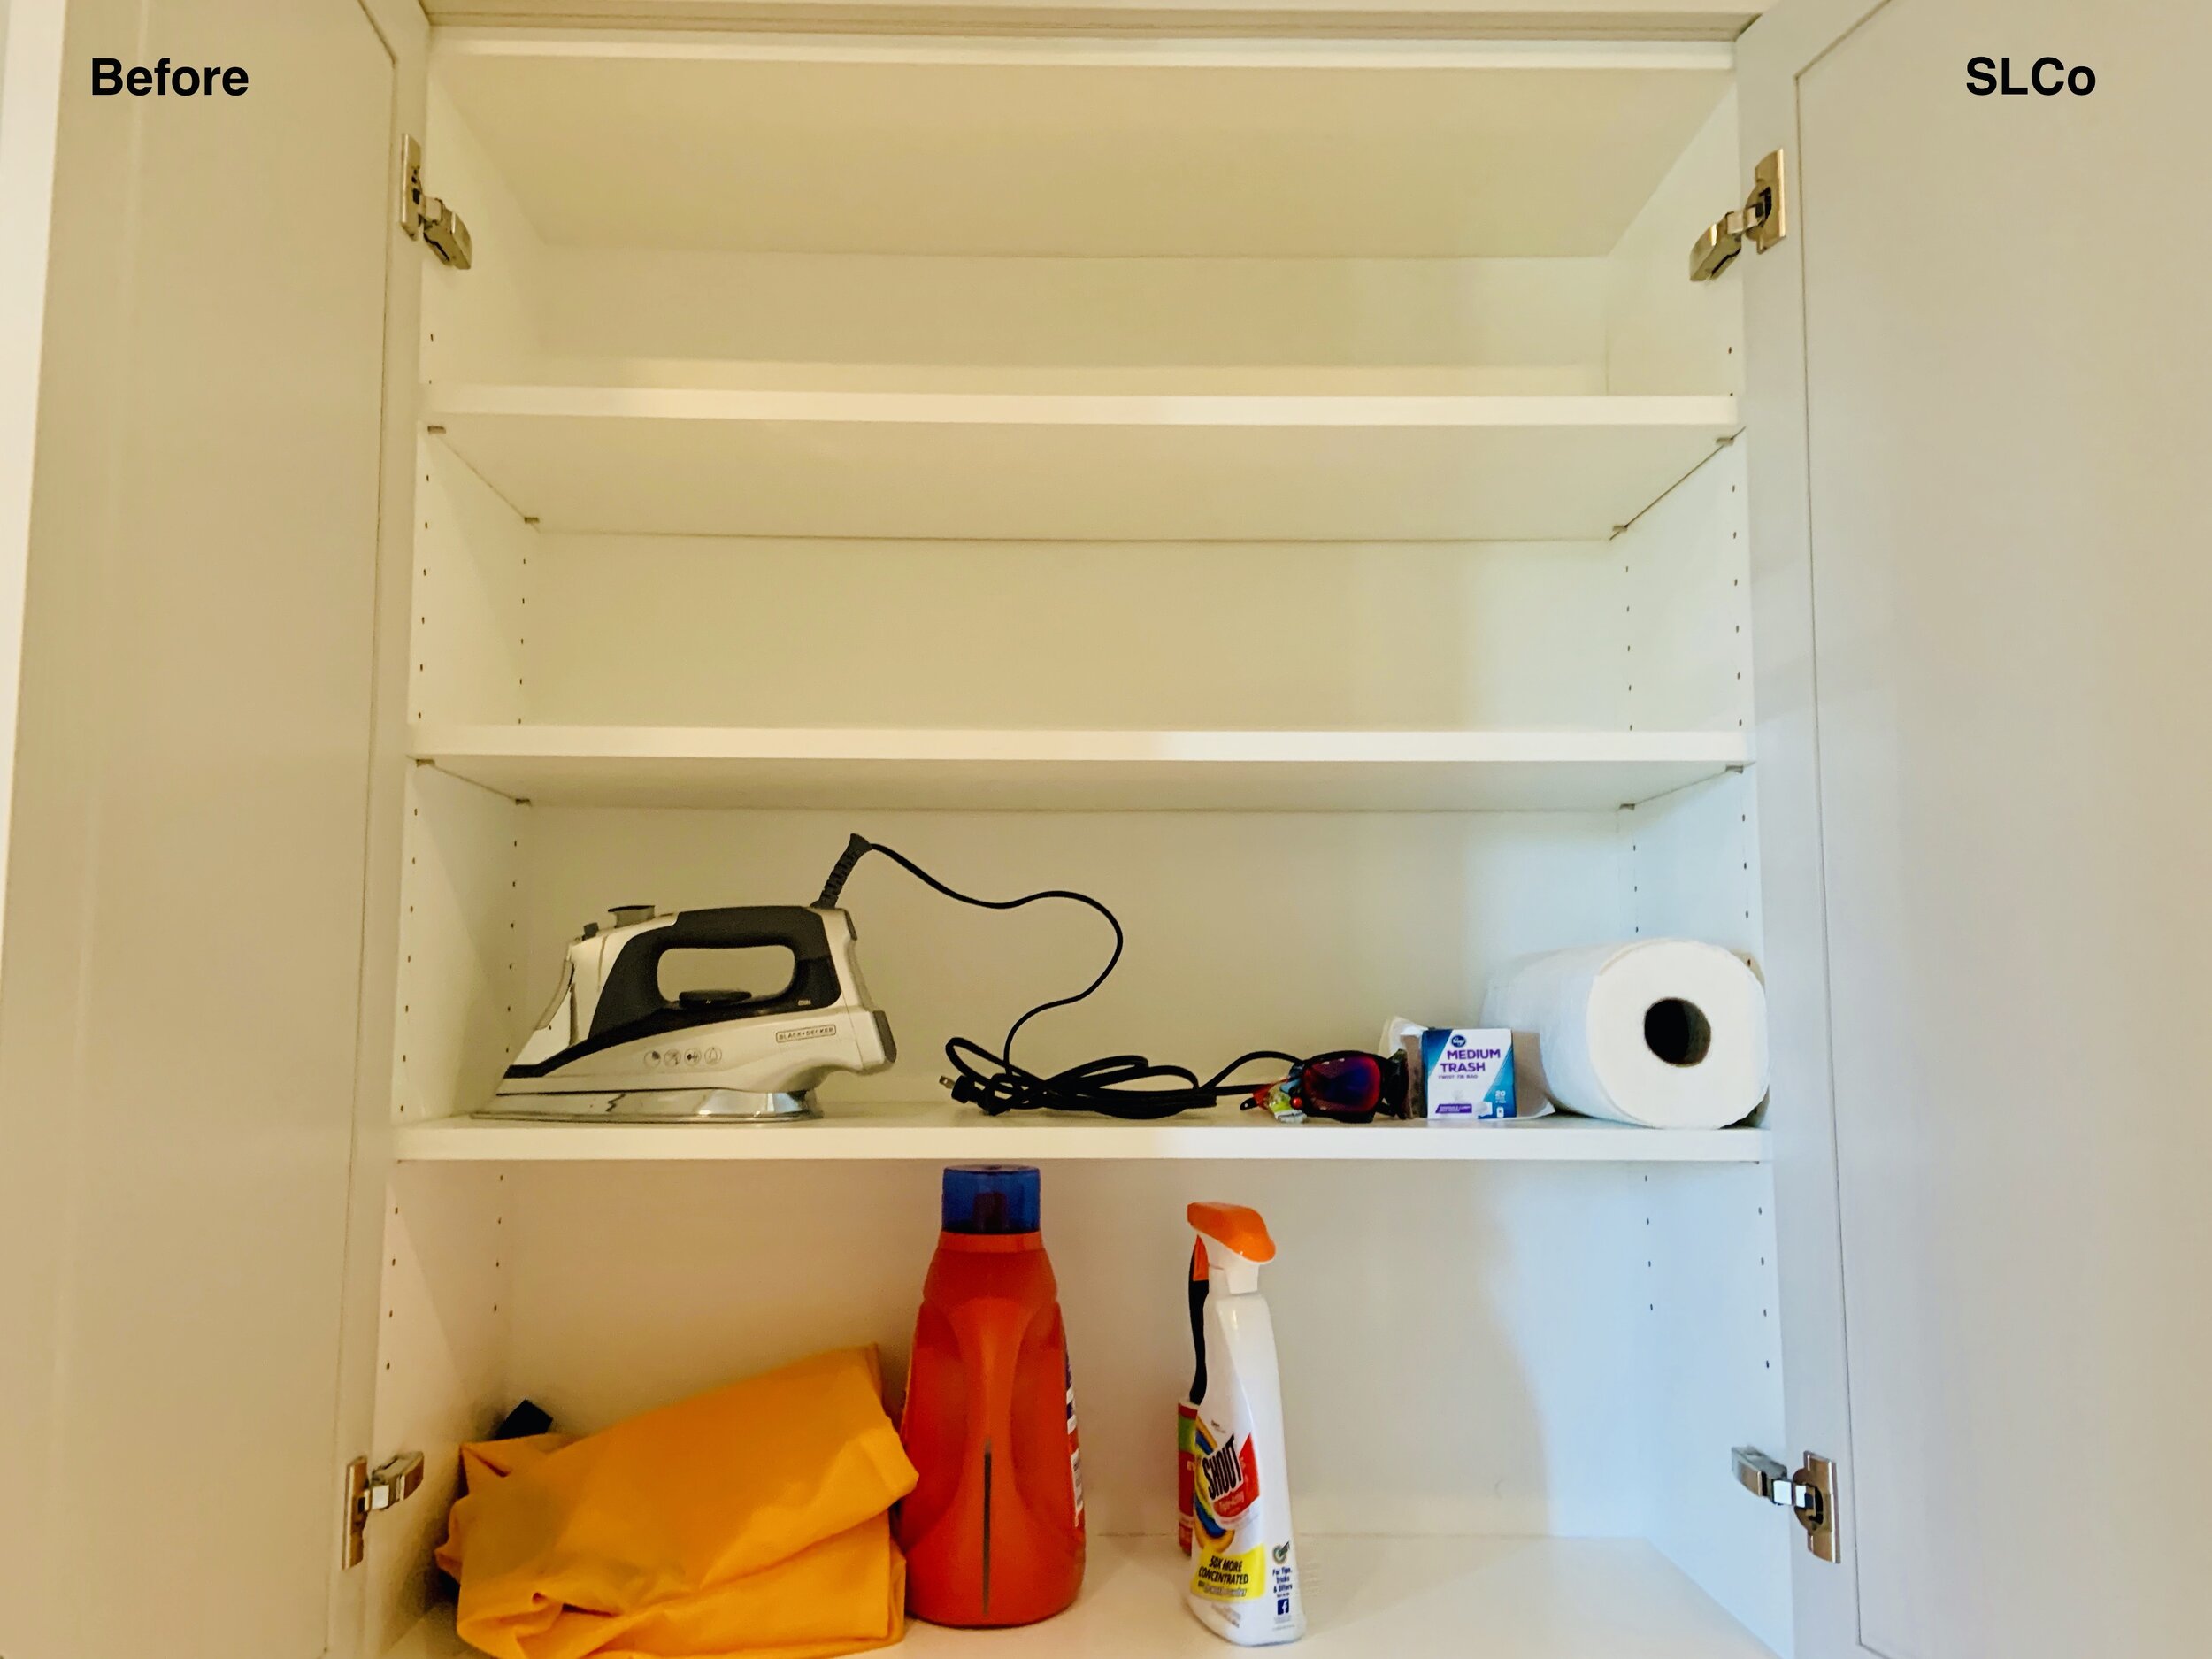 Laundry room cupboard with 4 white shelves, 2 laundry detergent containers and an iron